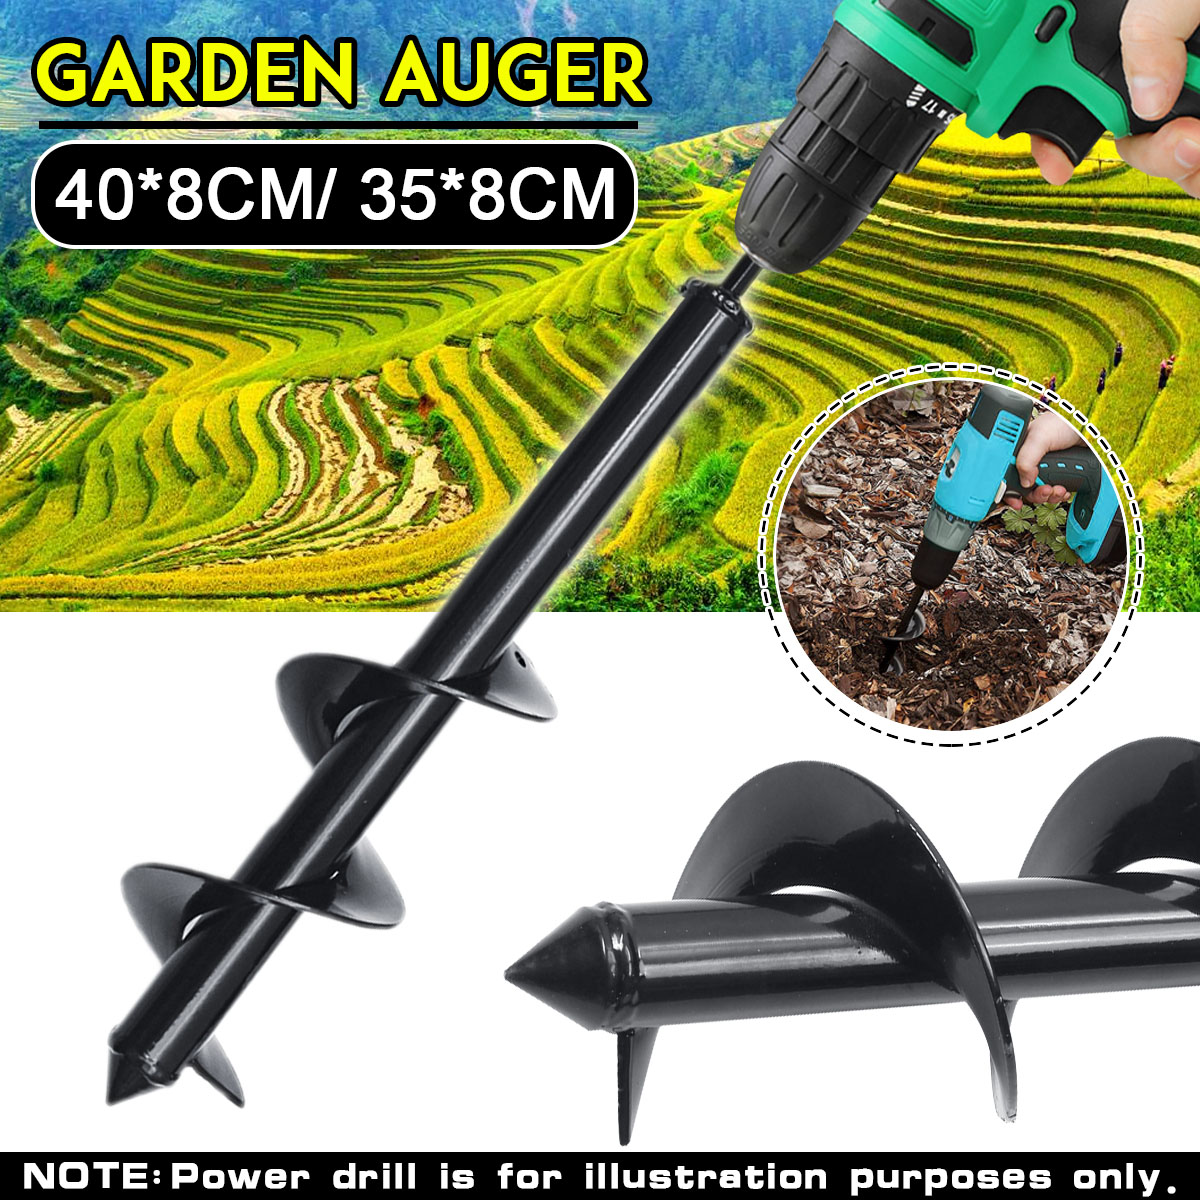 8x3540cm-Garden-Auger-Earth-Planter-Drill-Post-Hole-Digger-Earth-Planting-Drill-for-Electric-Drill-1550219-2